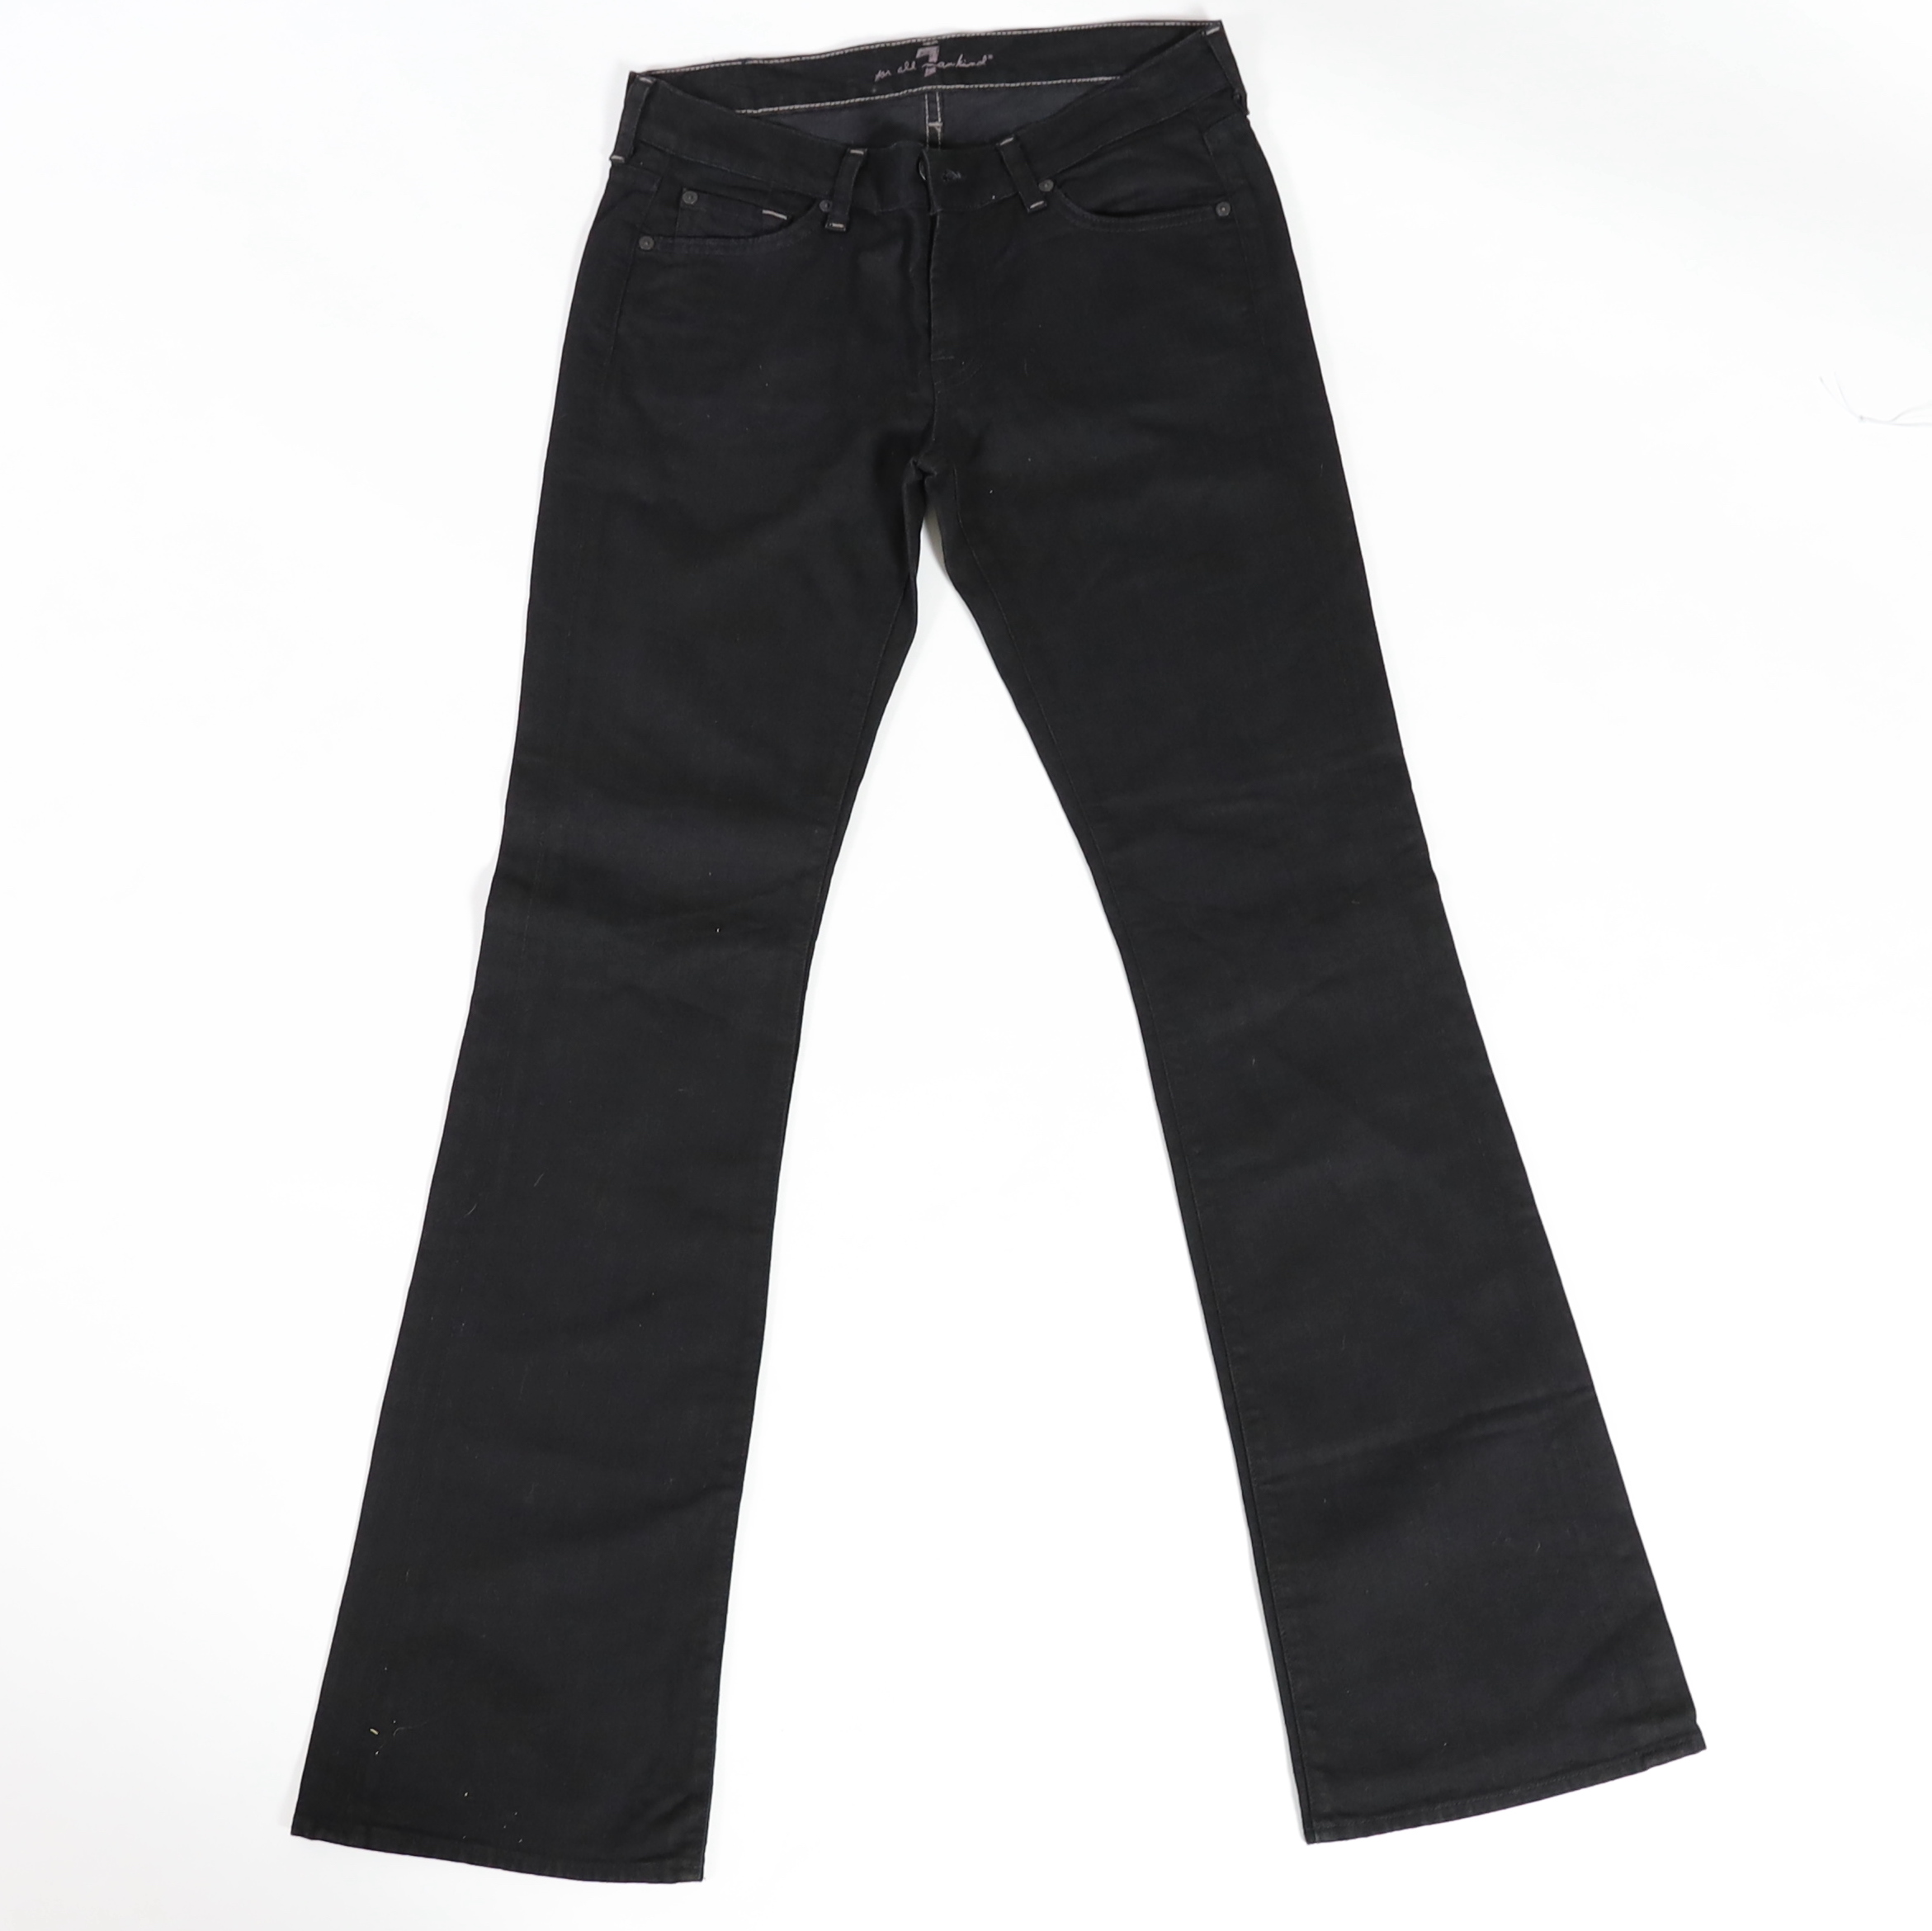 Two pairs of 7 All Mankind lady's jeans, one straight leg, the other flare, size 29***CONDITION - Image 8 of 12